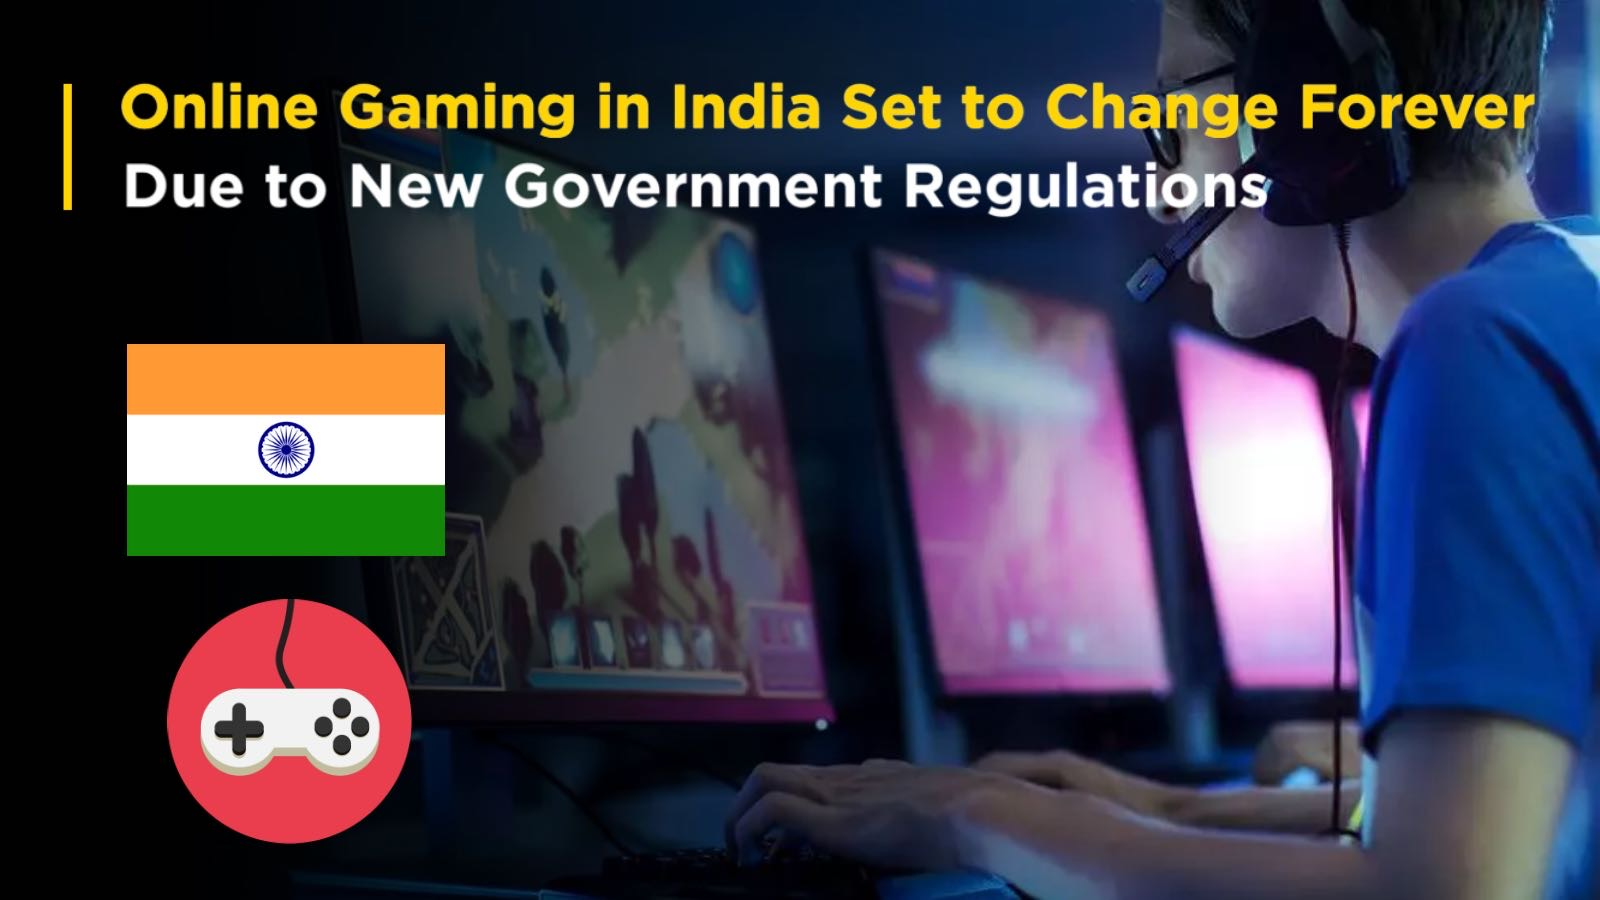 Online Gaming in India Set to Change Forever Due to New Government Regulations